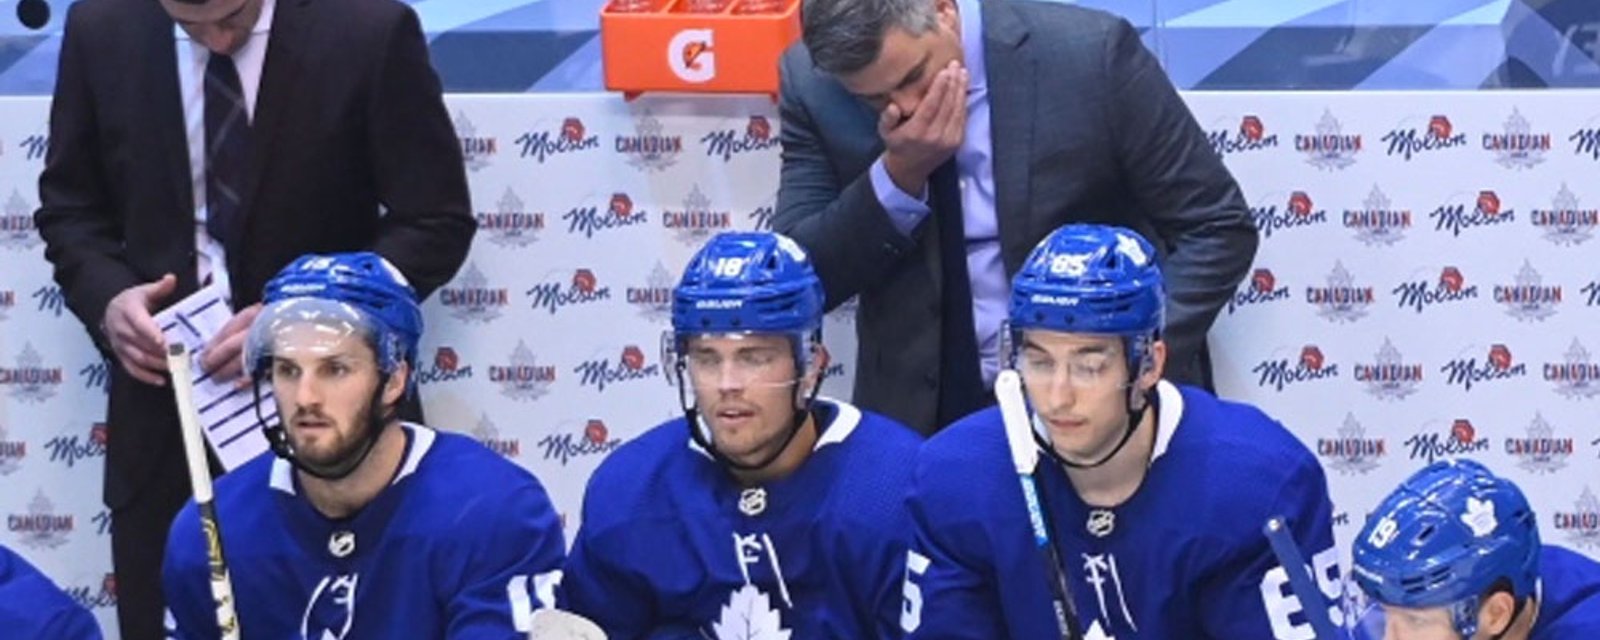 Leafs make coaching changes after playoff elimination